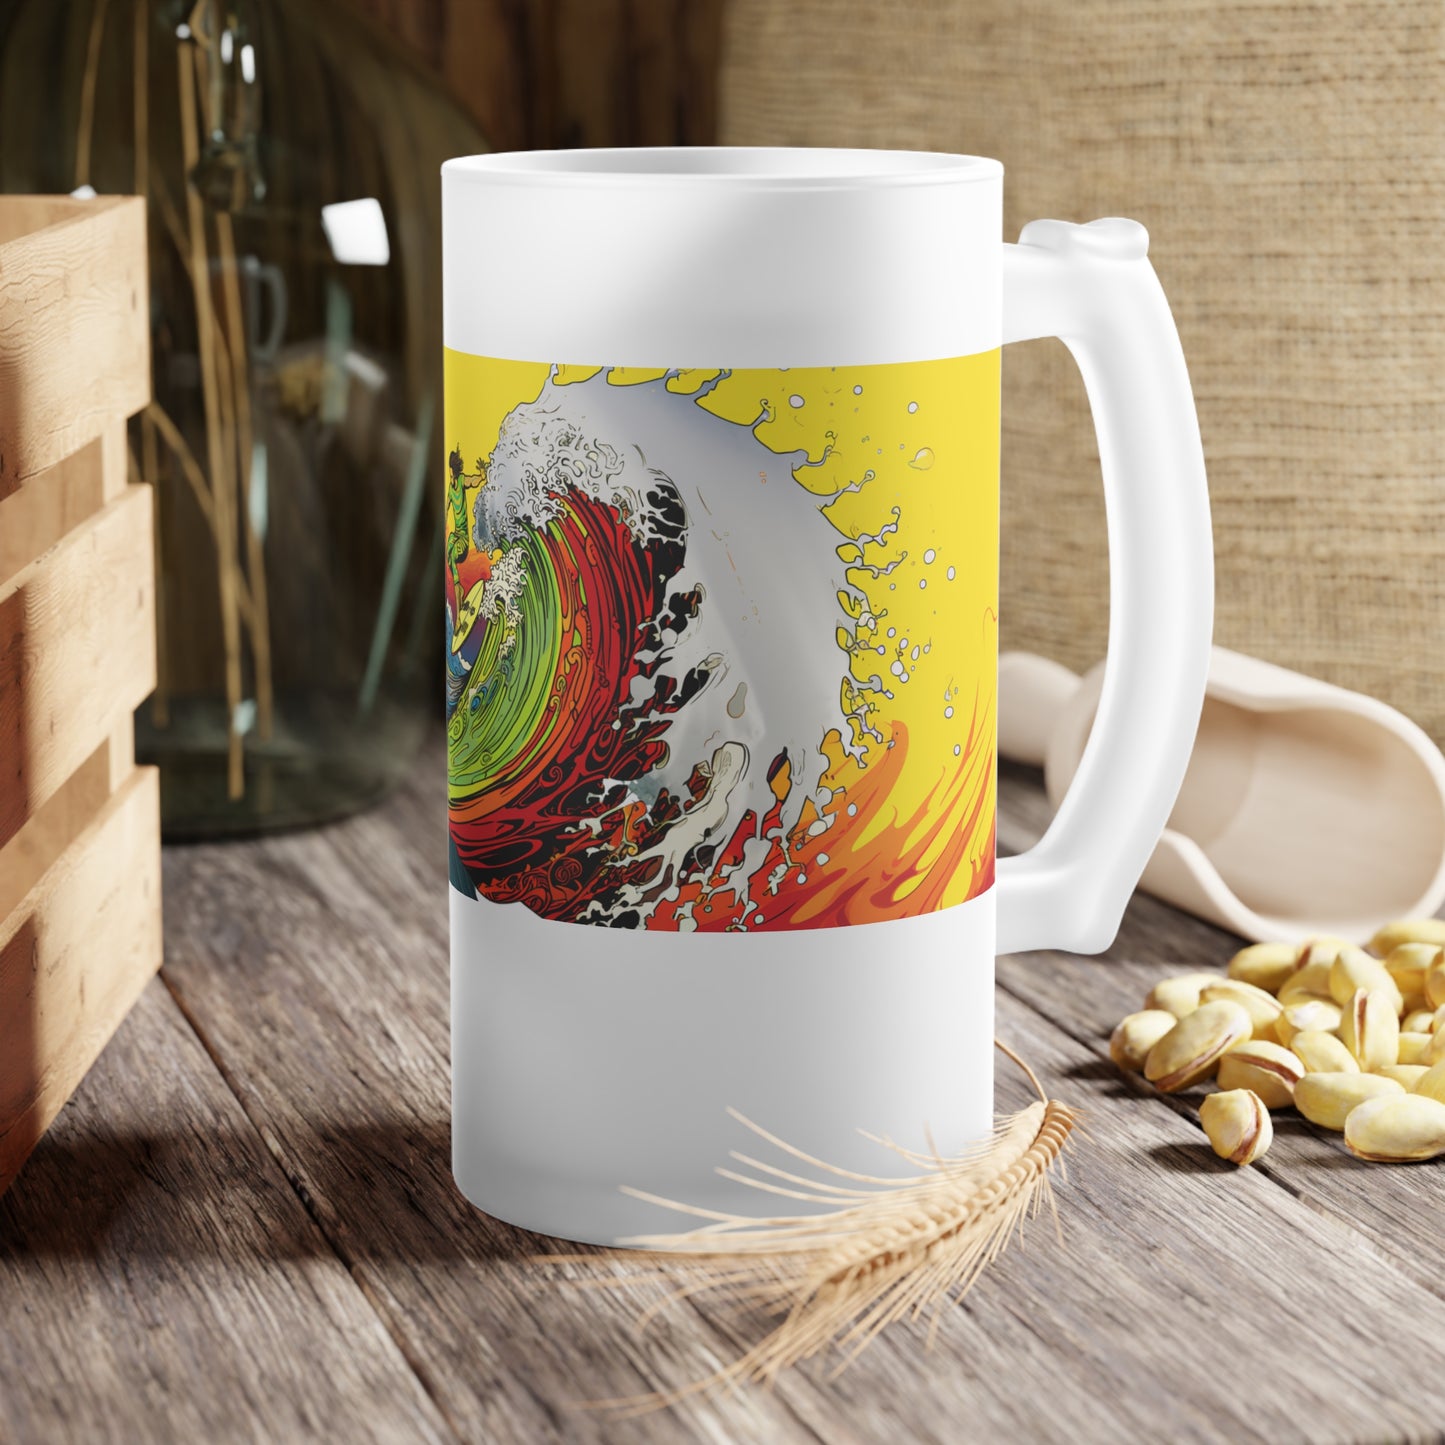 Immerse yourself in a psychedelic beach experience with our Mixed Media Surfer Frosted Glass Beer Mug, Design #063. Your glassware, your whimsical beach escape, exclusively at Stashbox.ai.